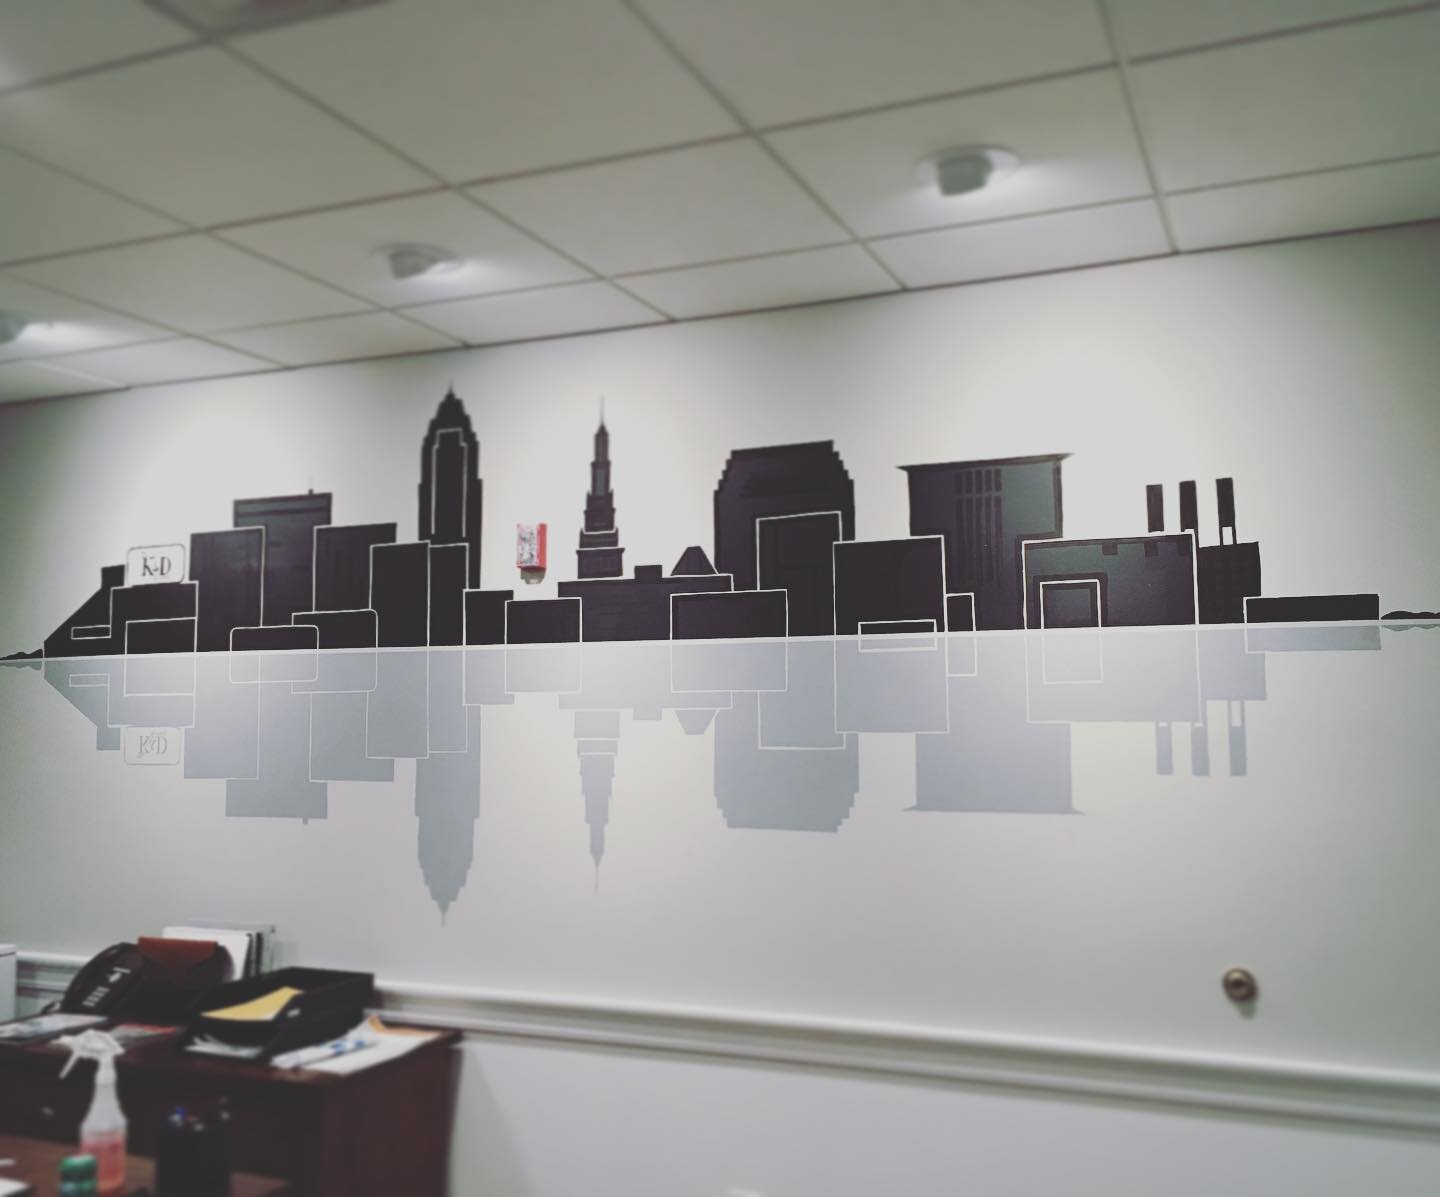 Knocked this skyline mural out today. Much thanks to Doug at K&amp;D for giving me work in uncertain times.